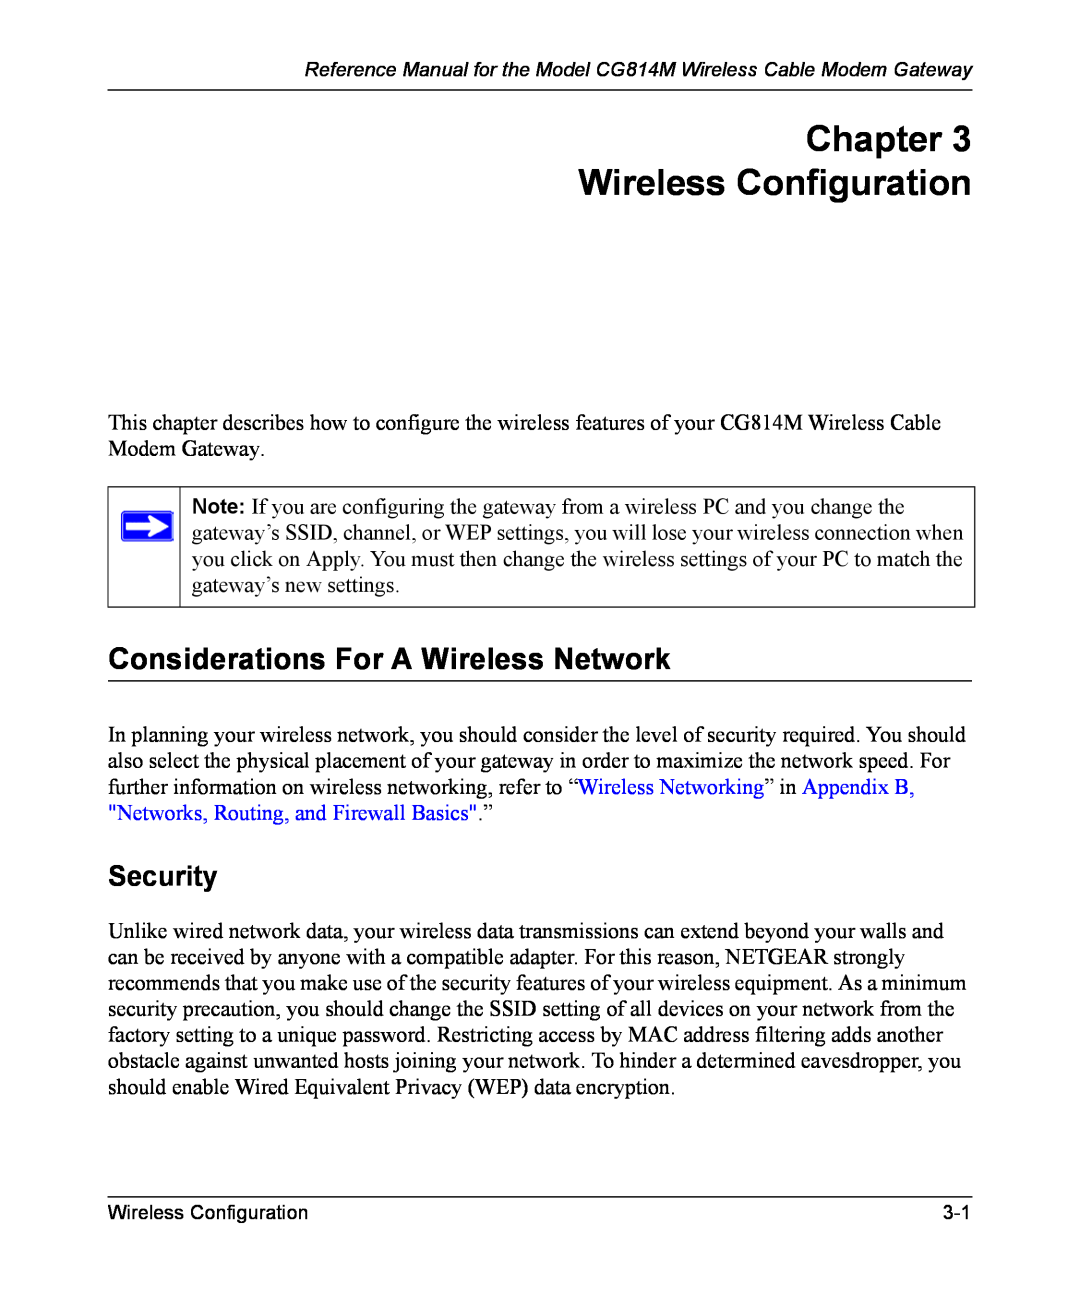 NETGEAR CG814M manual Chapter Wireless Configuration, Considerations For A Wireless Network, Security 